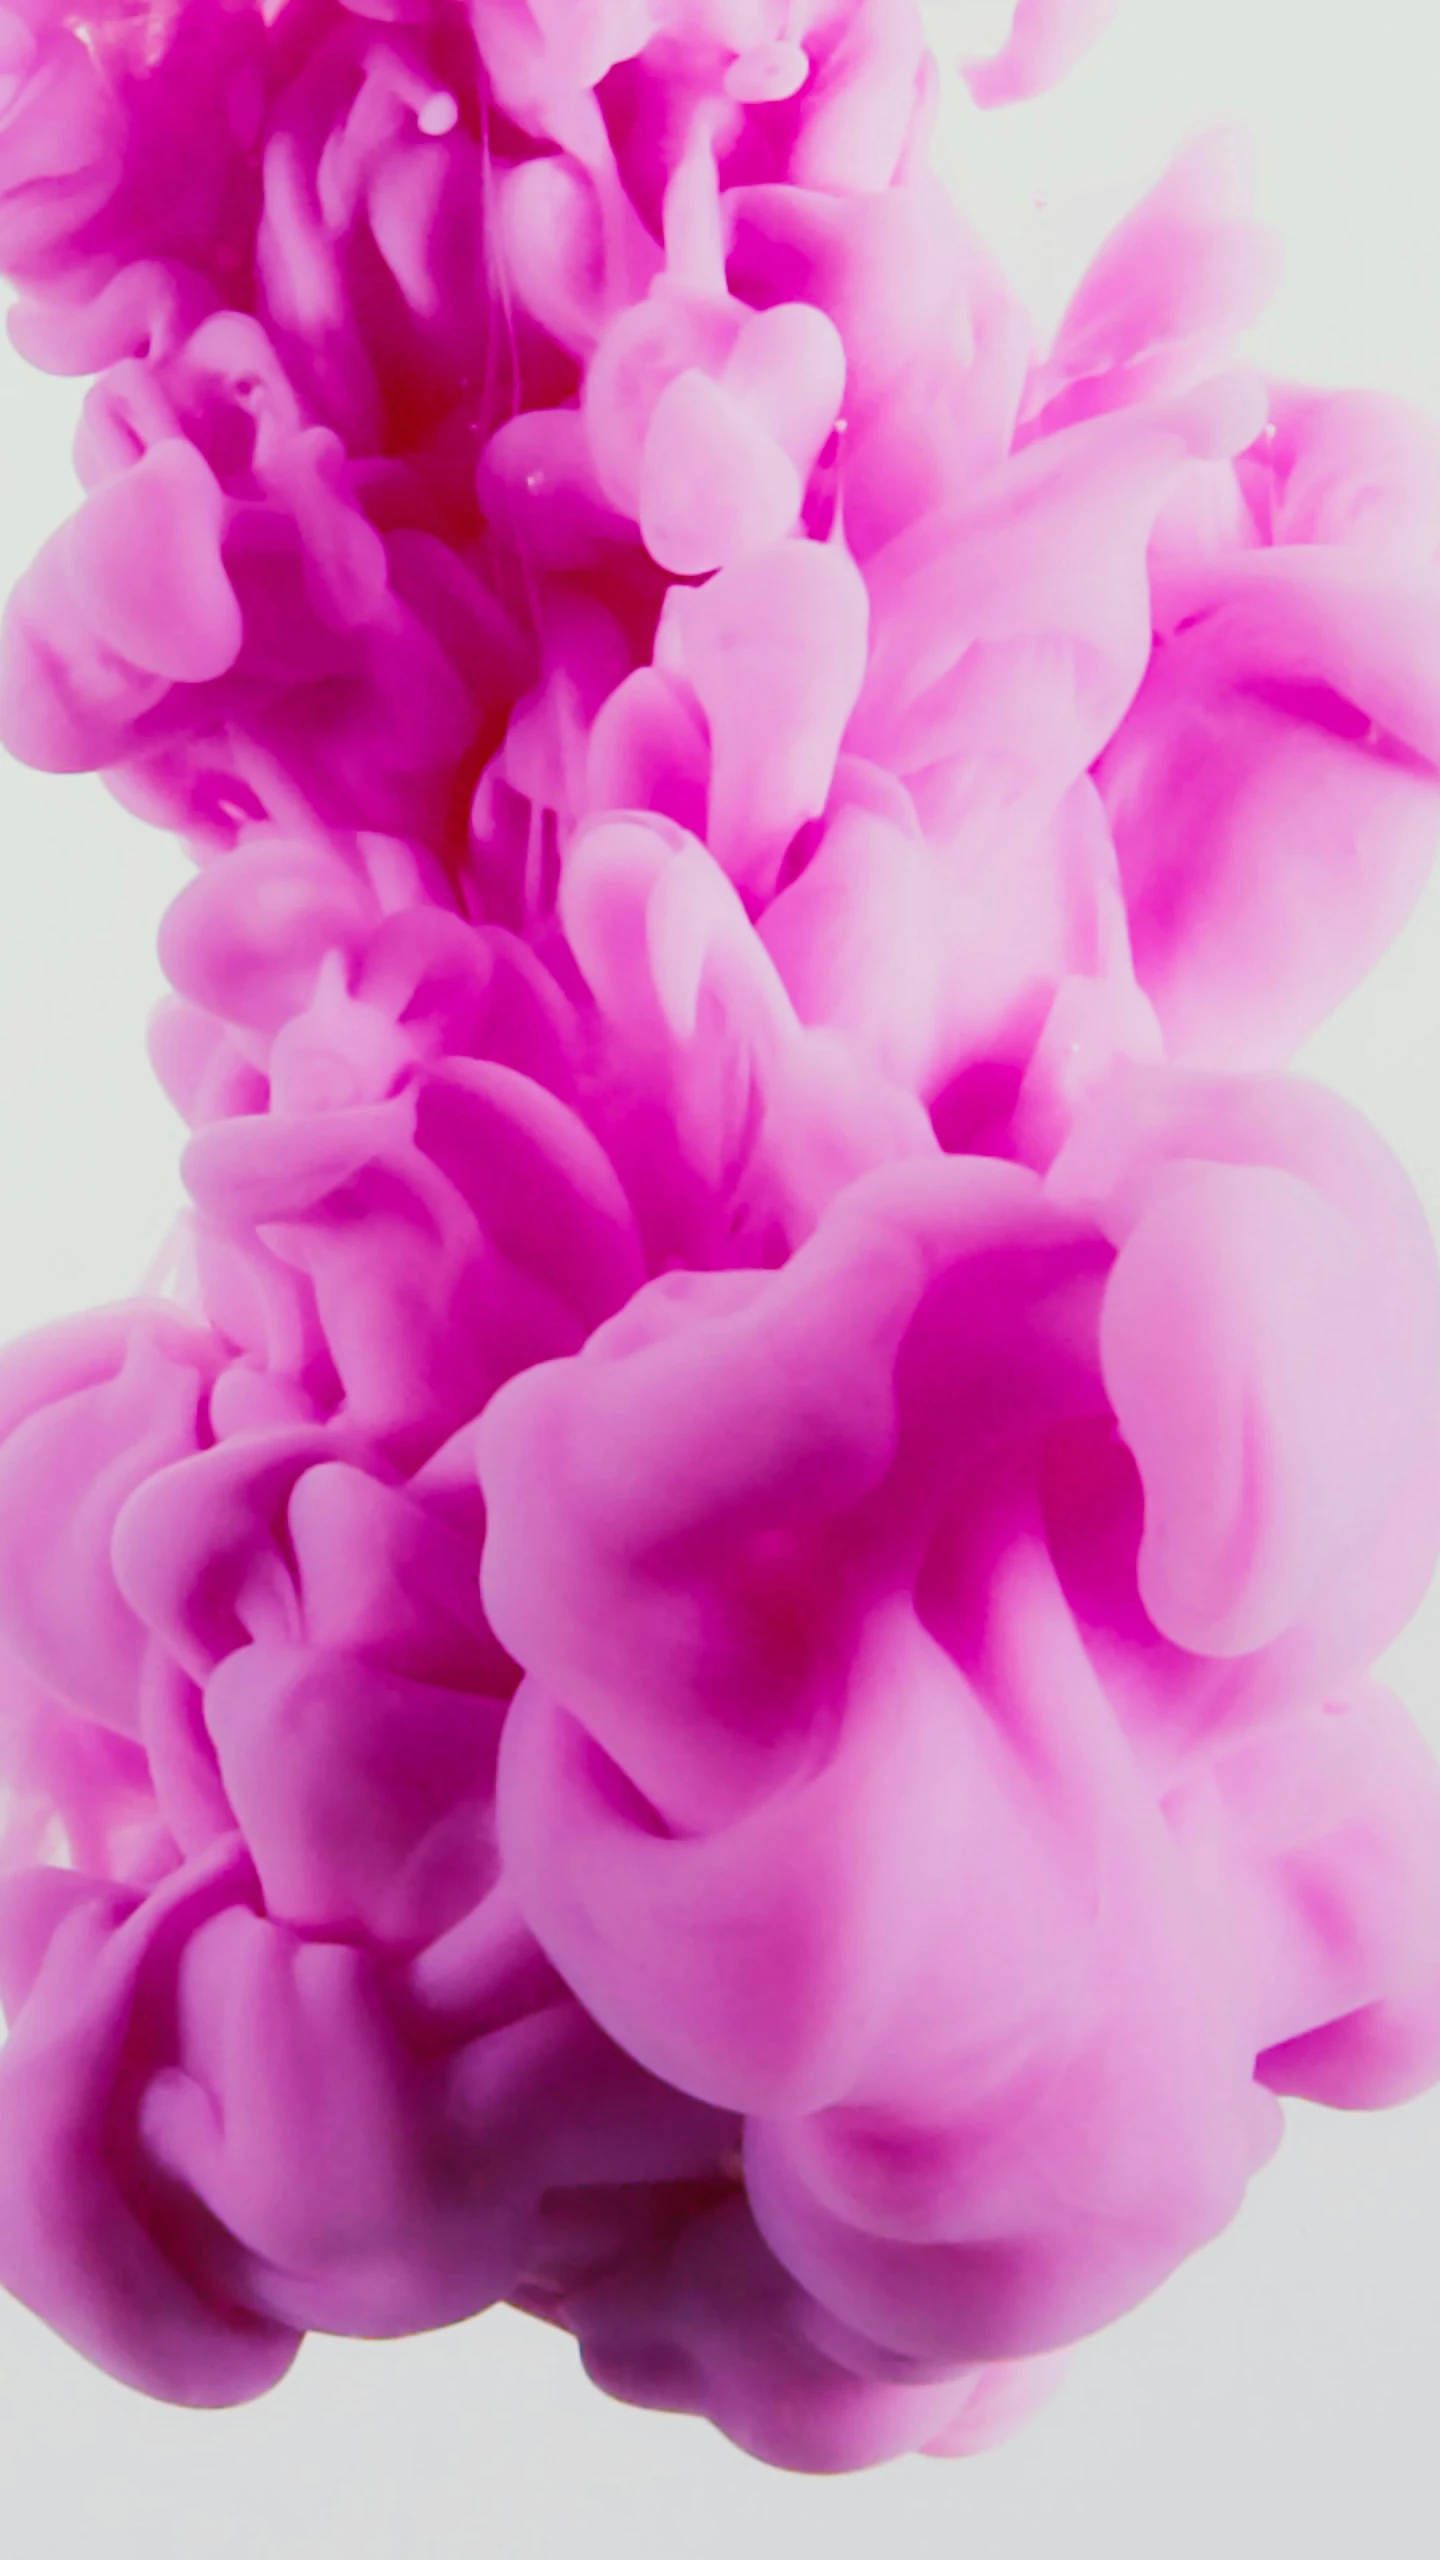 a close up of a pink substance in water, an airbrush painting, inspired by Lynda Benglis, pexels, showstudio, 3 d 8 k octane rendered, nick knight, made of cotton candy